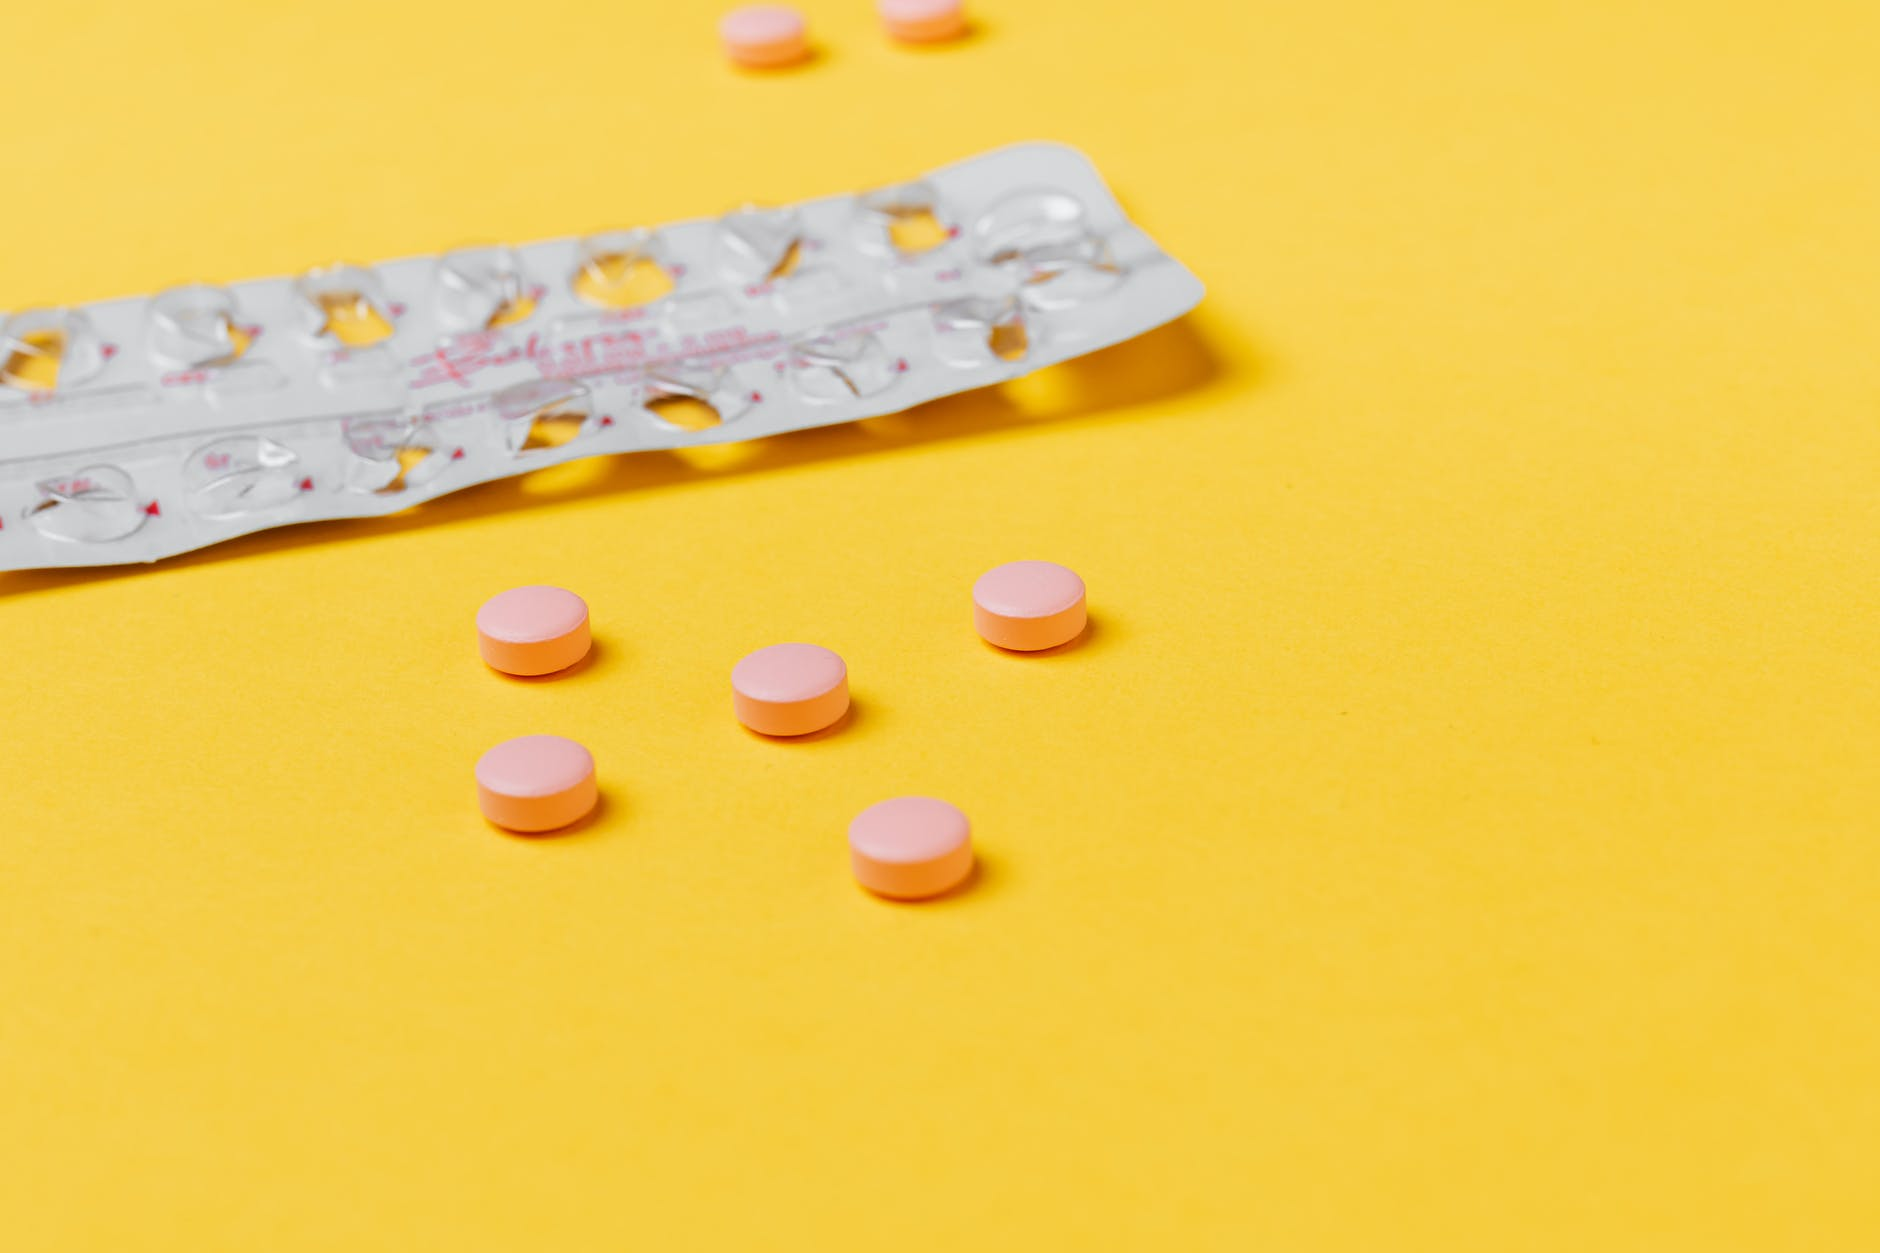 pink pills scattered on a yellow surface